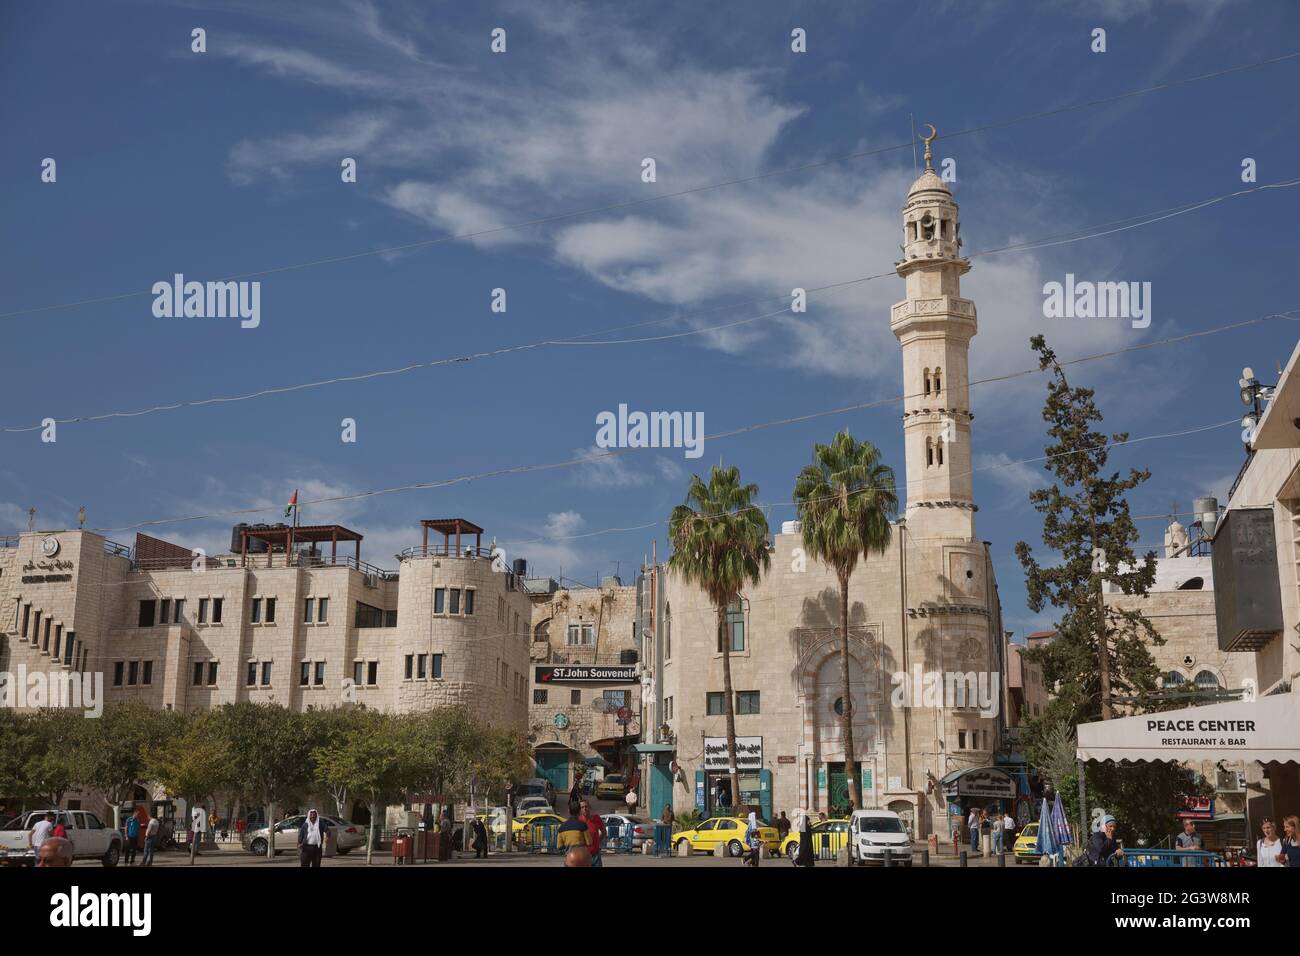 People and city life on the street of Bethlehem, State of Palestine Stock Photo